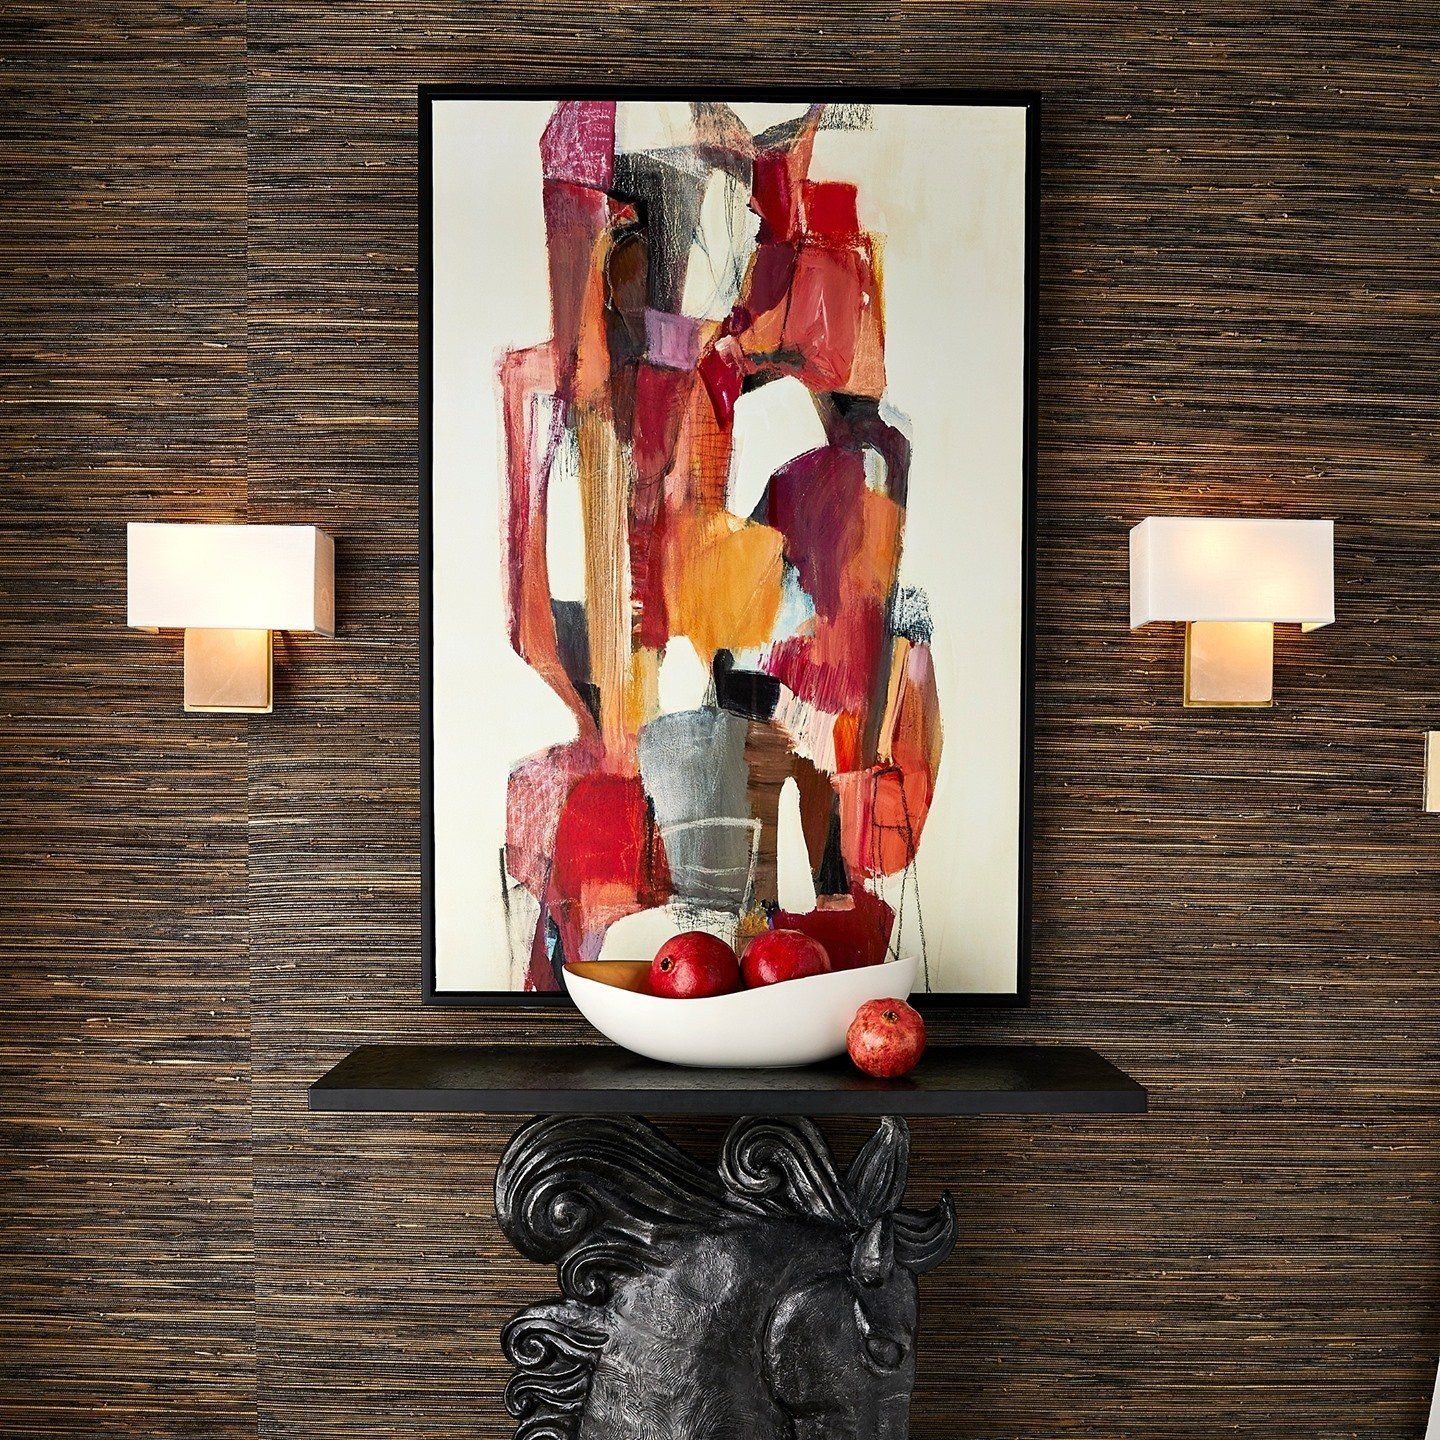 Retro abstract art brings pops or orange and red to this chic room